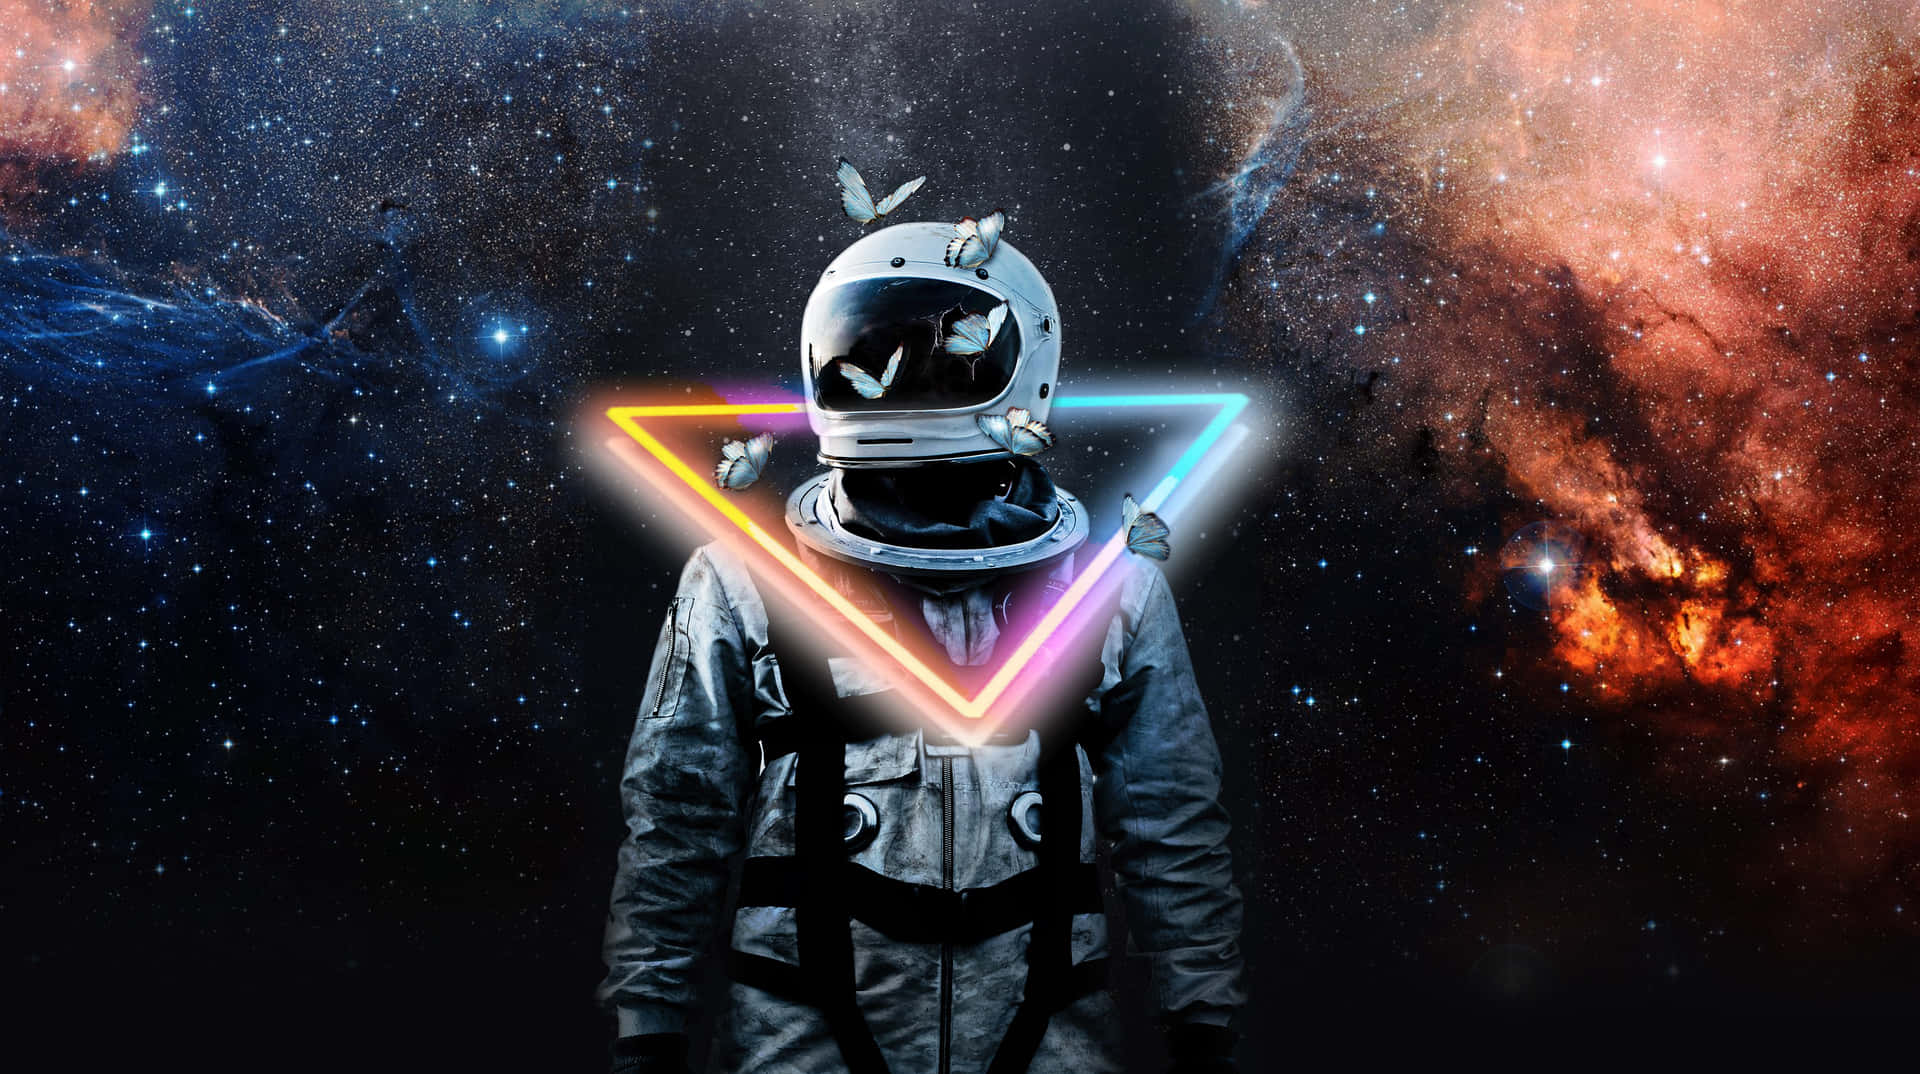 Astronaut Wallpaper 4K, Cosmos, Planet, Rings of Saturn-cheohanoi.vn